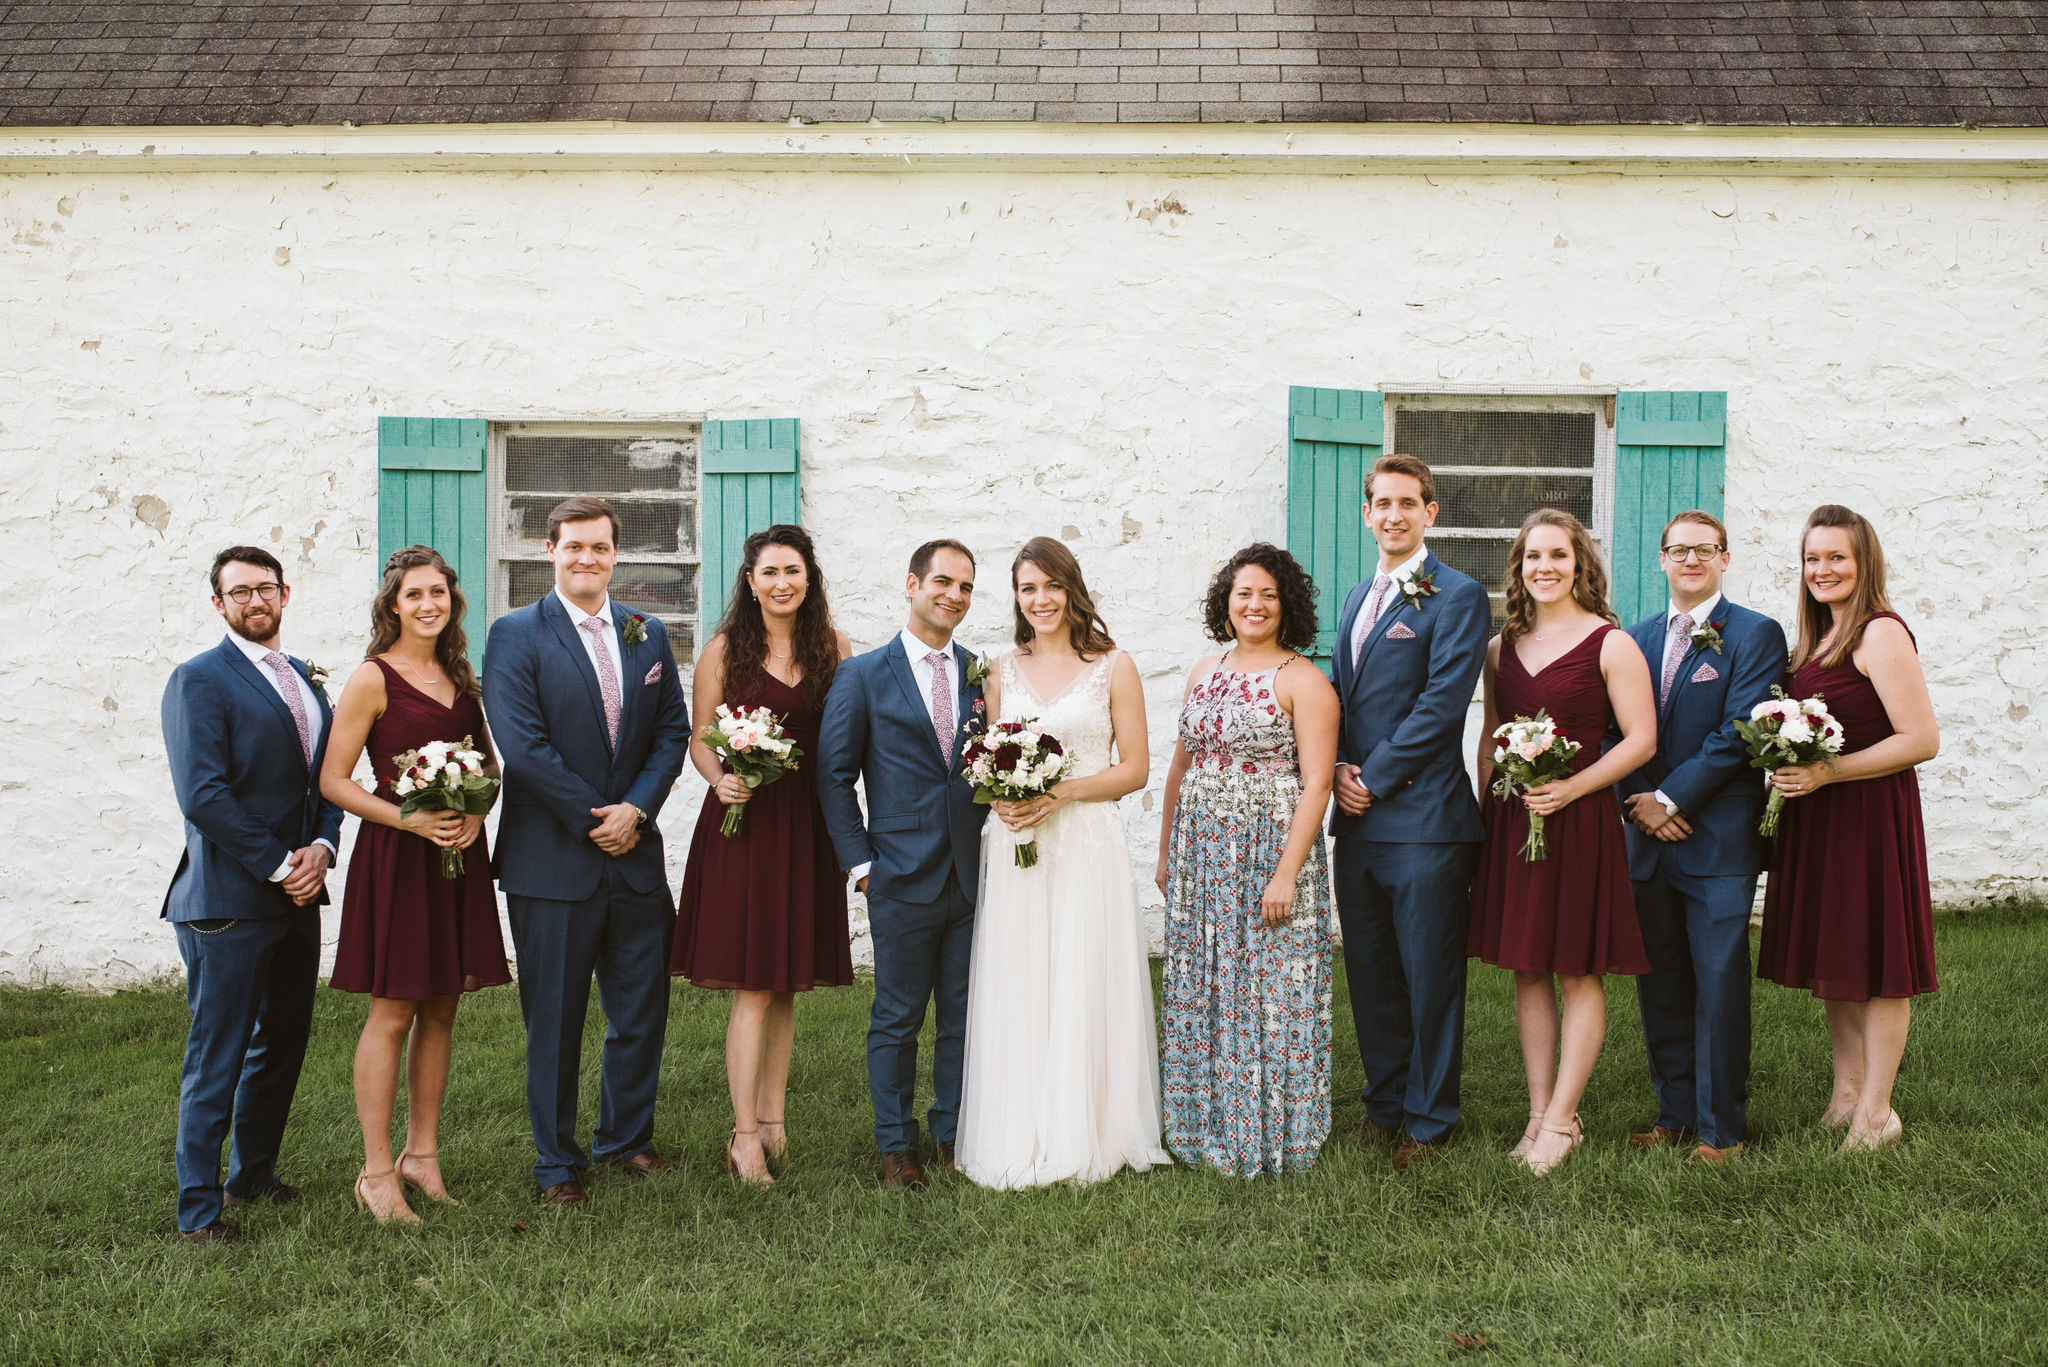  Phoenix Maryland, Baltimore Wedding Photographer, Eagle’s Nest Country Club, Classic, Romantic, Portrait of Bridal Party in Front of Cottage, BHLDN Wedding Dress, Generation Tux Suits, Brideside Bridesmaid Dresses,  